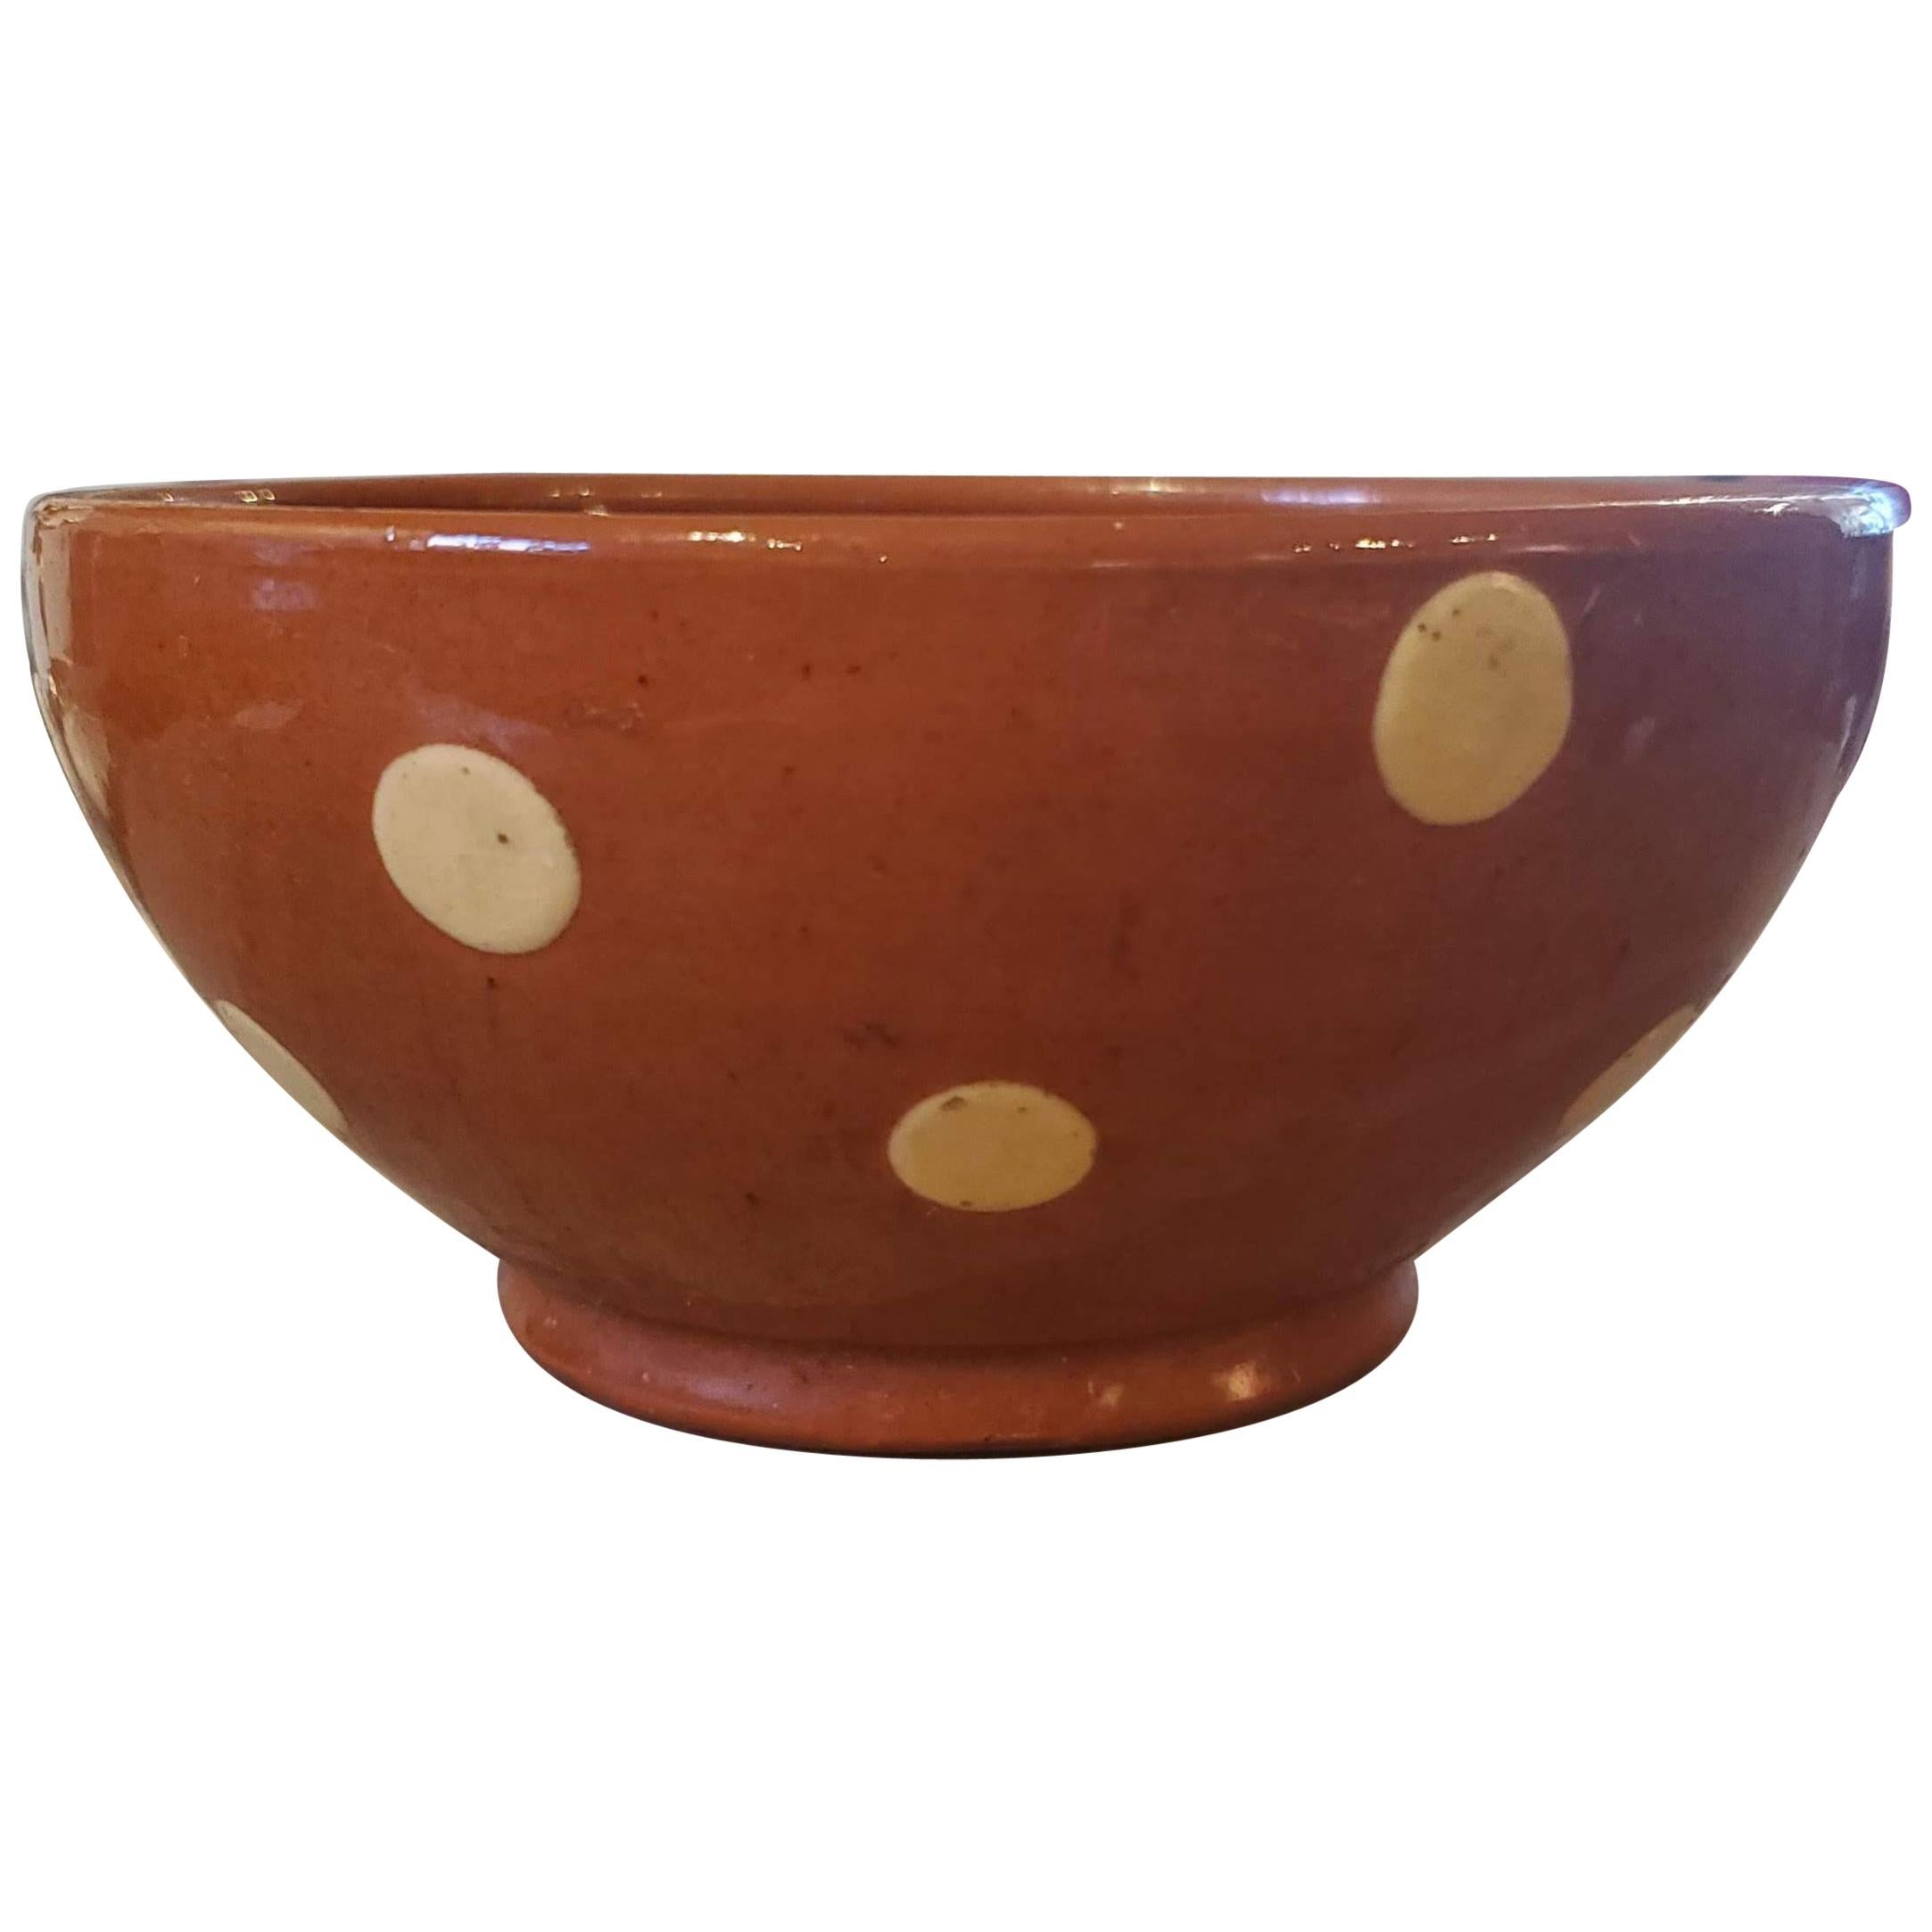 Small 19th Century French Provincial Terracotta Bowl with Cream Polka Dots